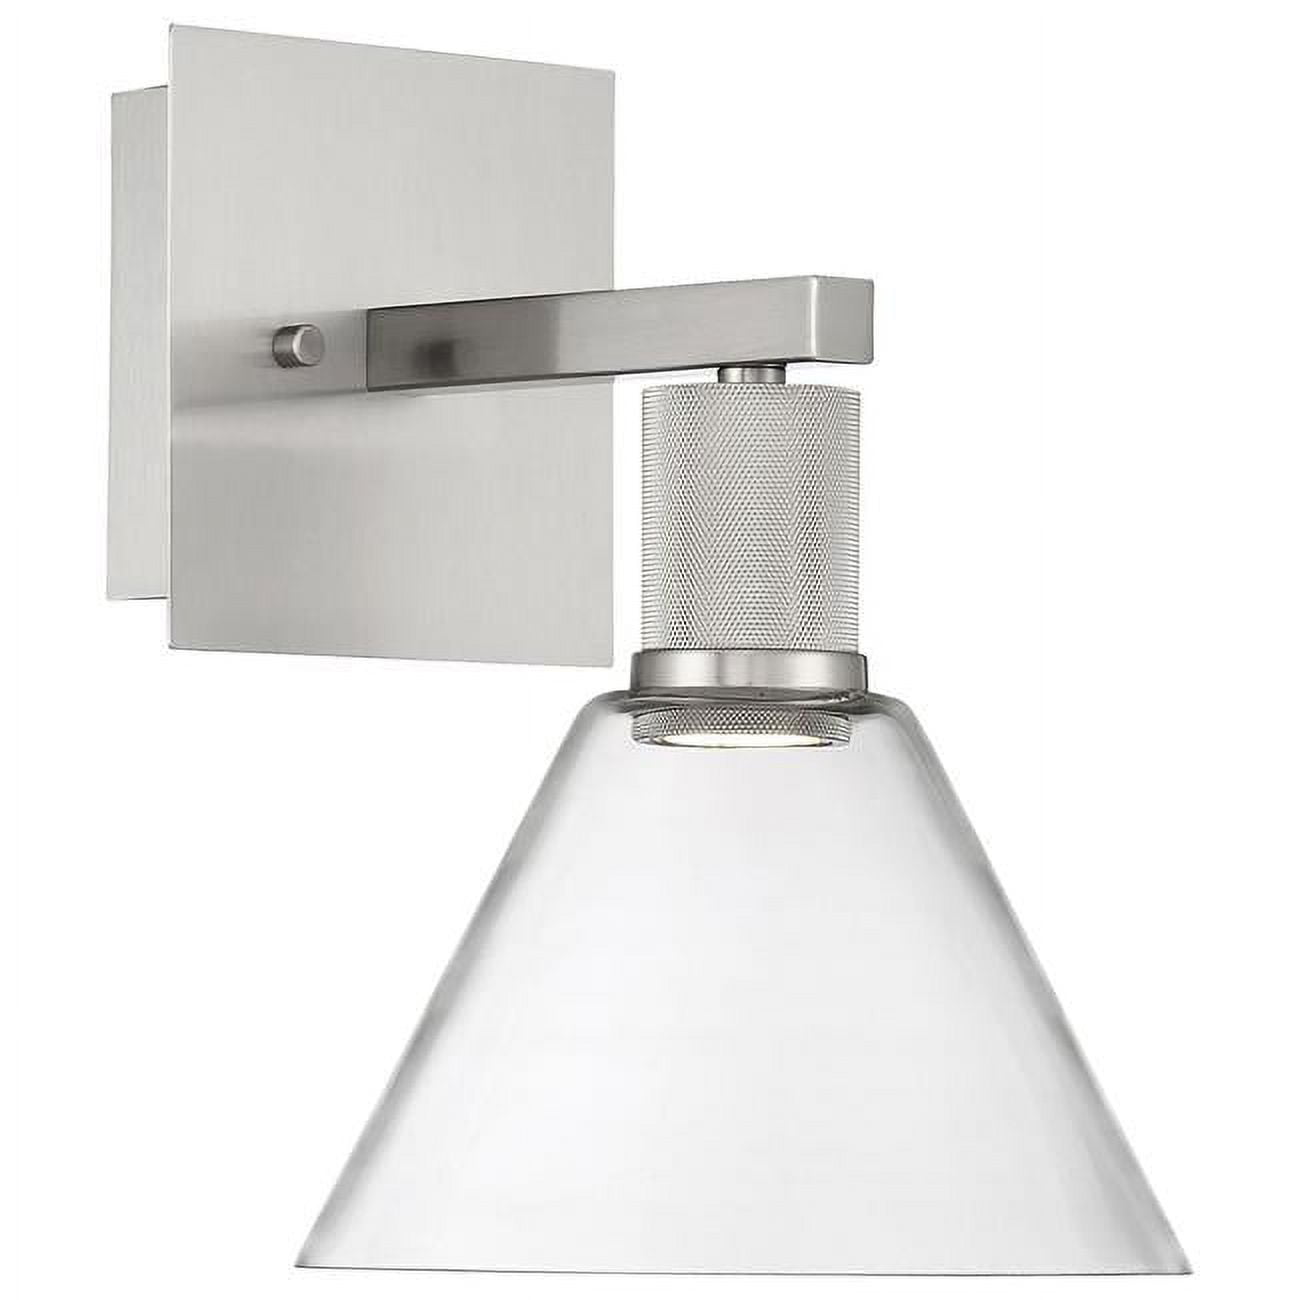 Picture of Access Lighting 63143LEDD-BS-CLR 8 in. Port Nine 1 Light LED Wall Sconce Wall Light, Clear - Martini - Brushed Steel